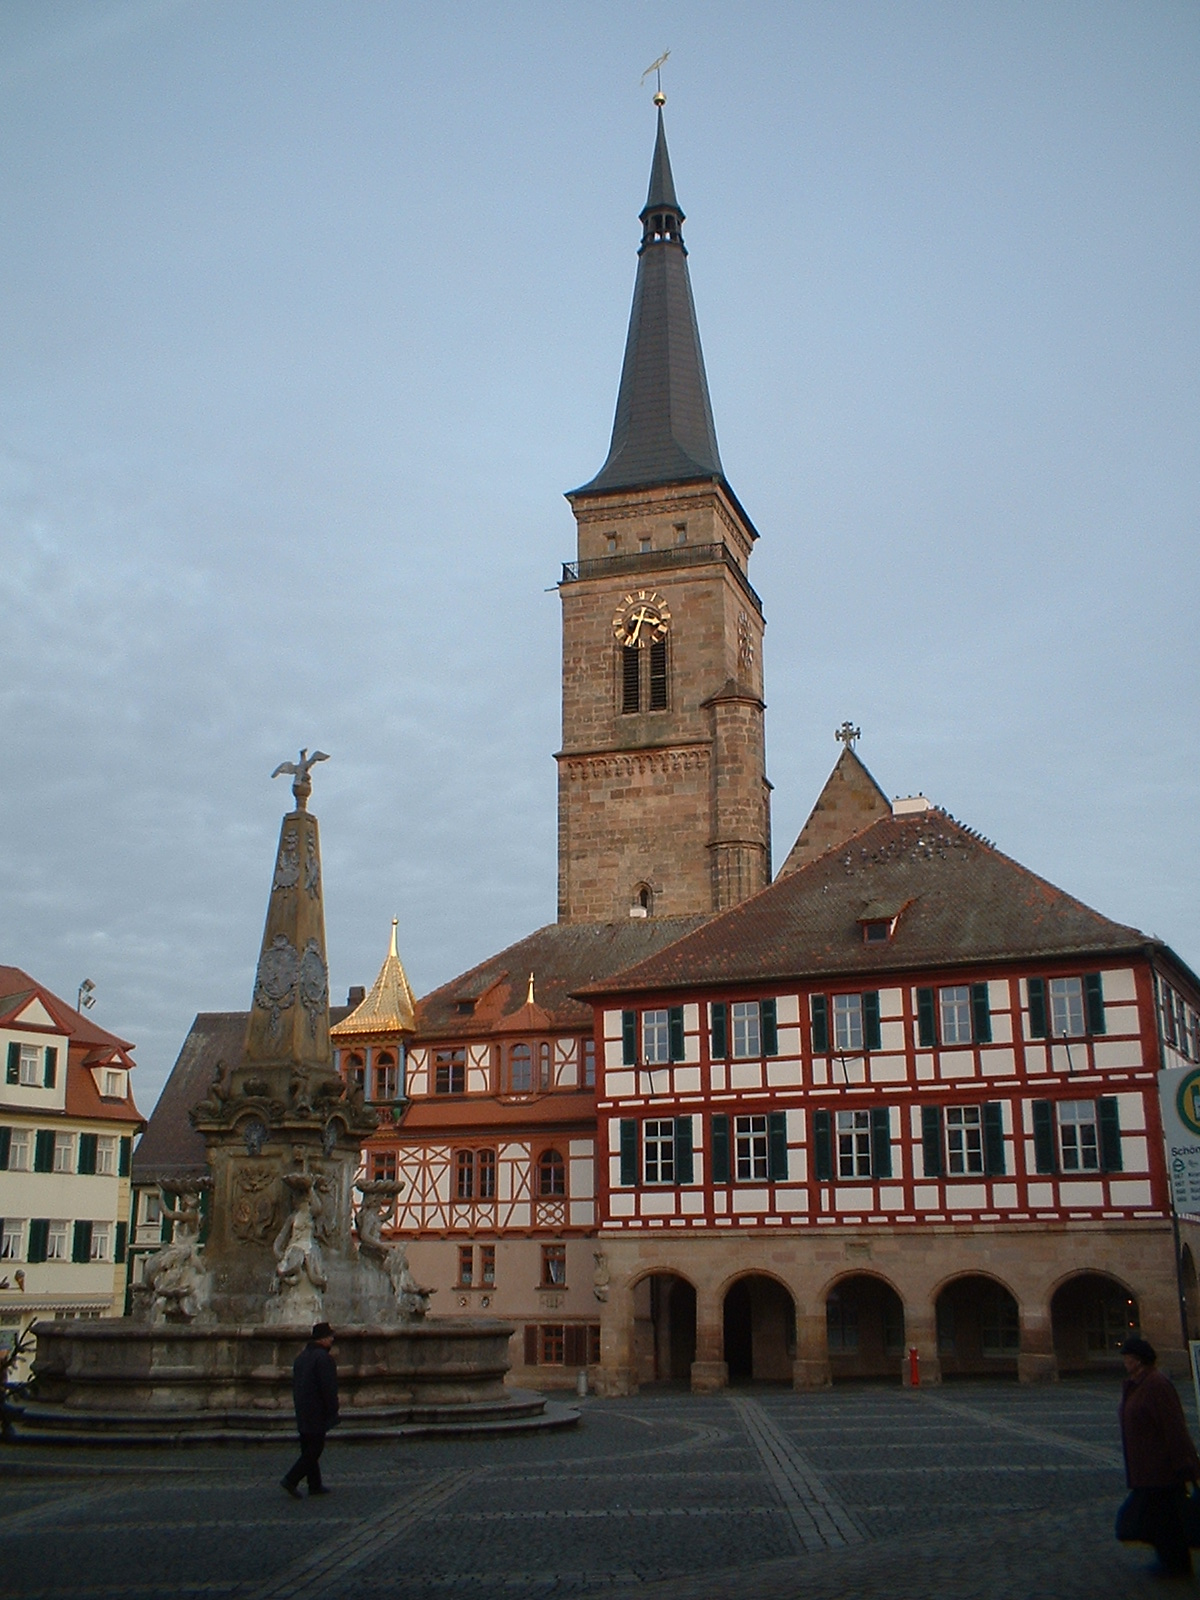 "Schwabach Rathaus Stadtkirche" by Waggerla at the German language Wikipedia. Licensed under CC BY-SA 3.0 via Wikimedia Commons - https://commons.wikimedia.org/wiki/File:Schwabach_Rathaus_Stadtkirche.jpg#/media/File:Schwabach_Rathaus_Stadtkirche.jpg